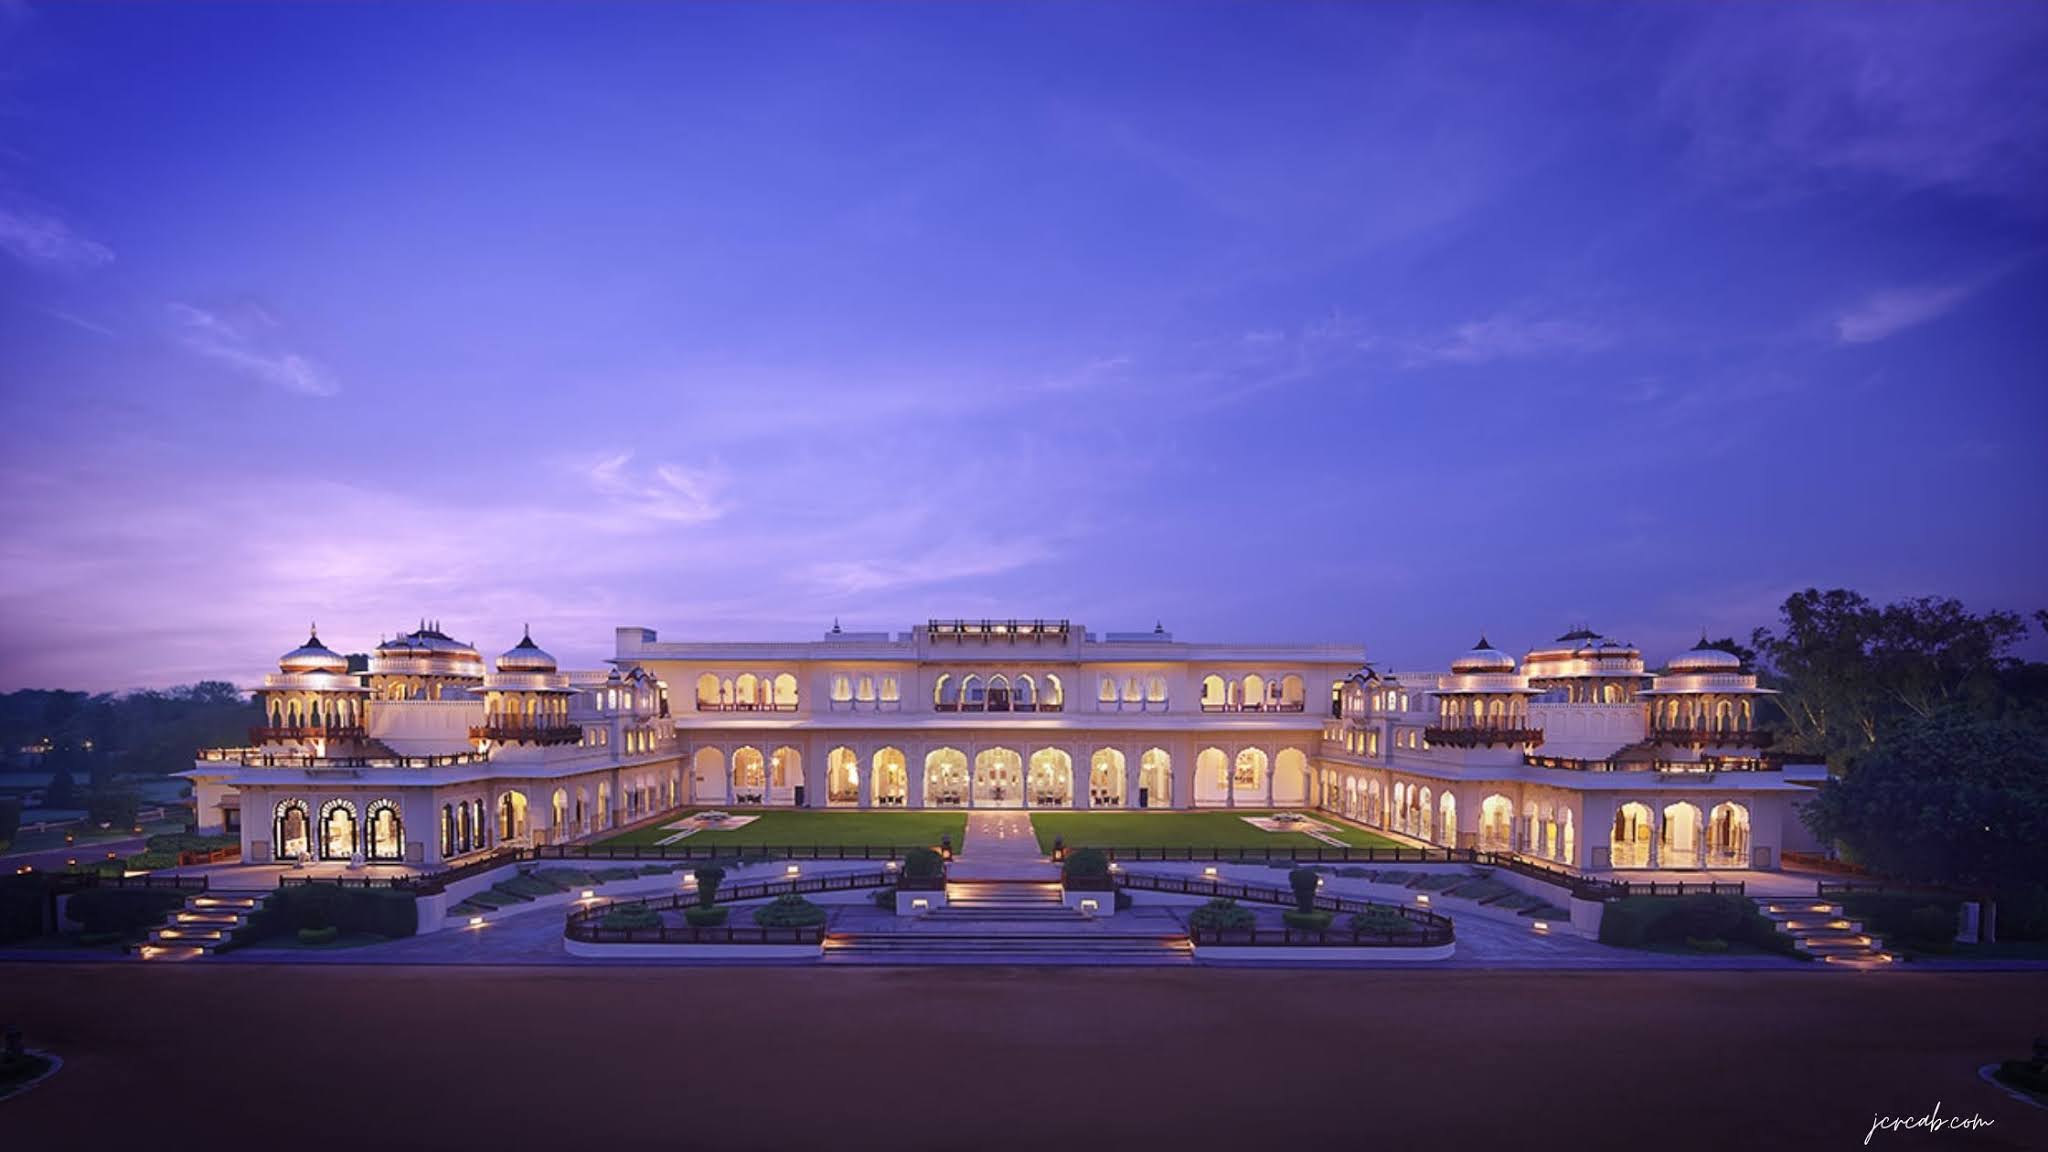 Rambagh Palace in Jaipur - History, Activities, Famous Food